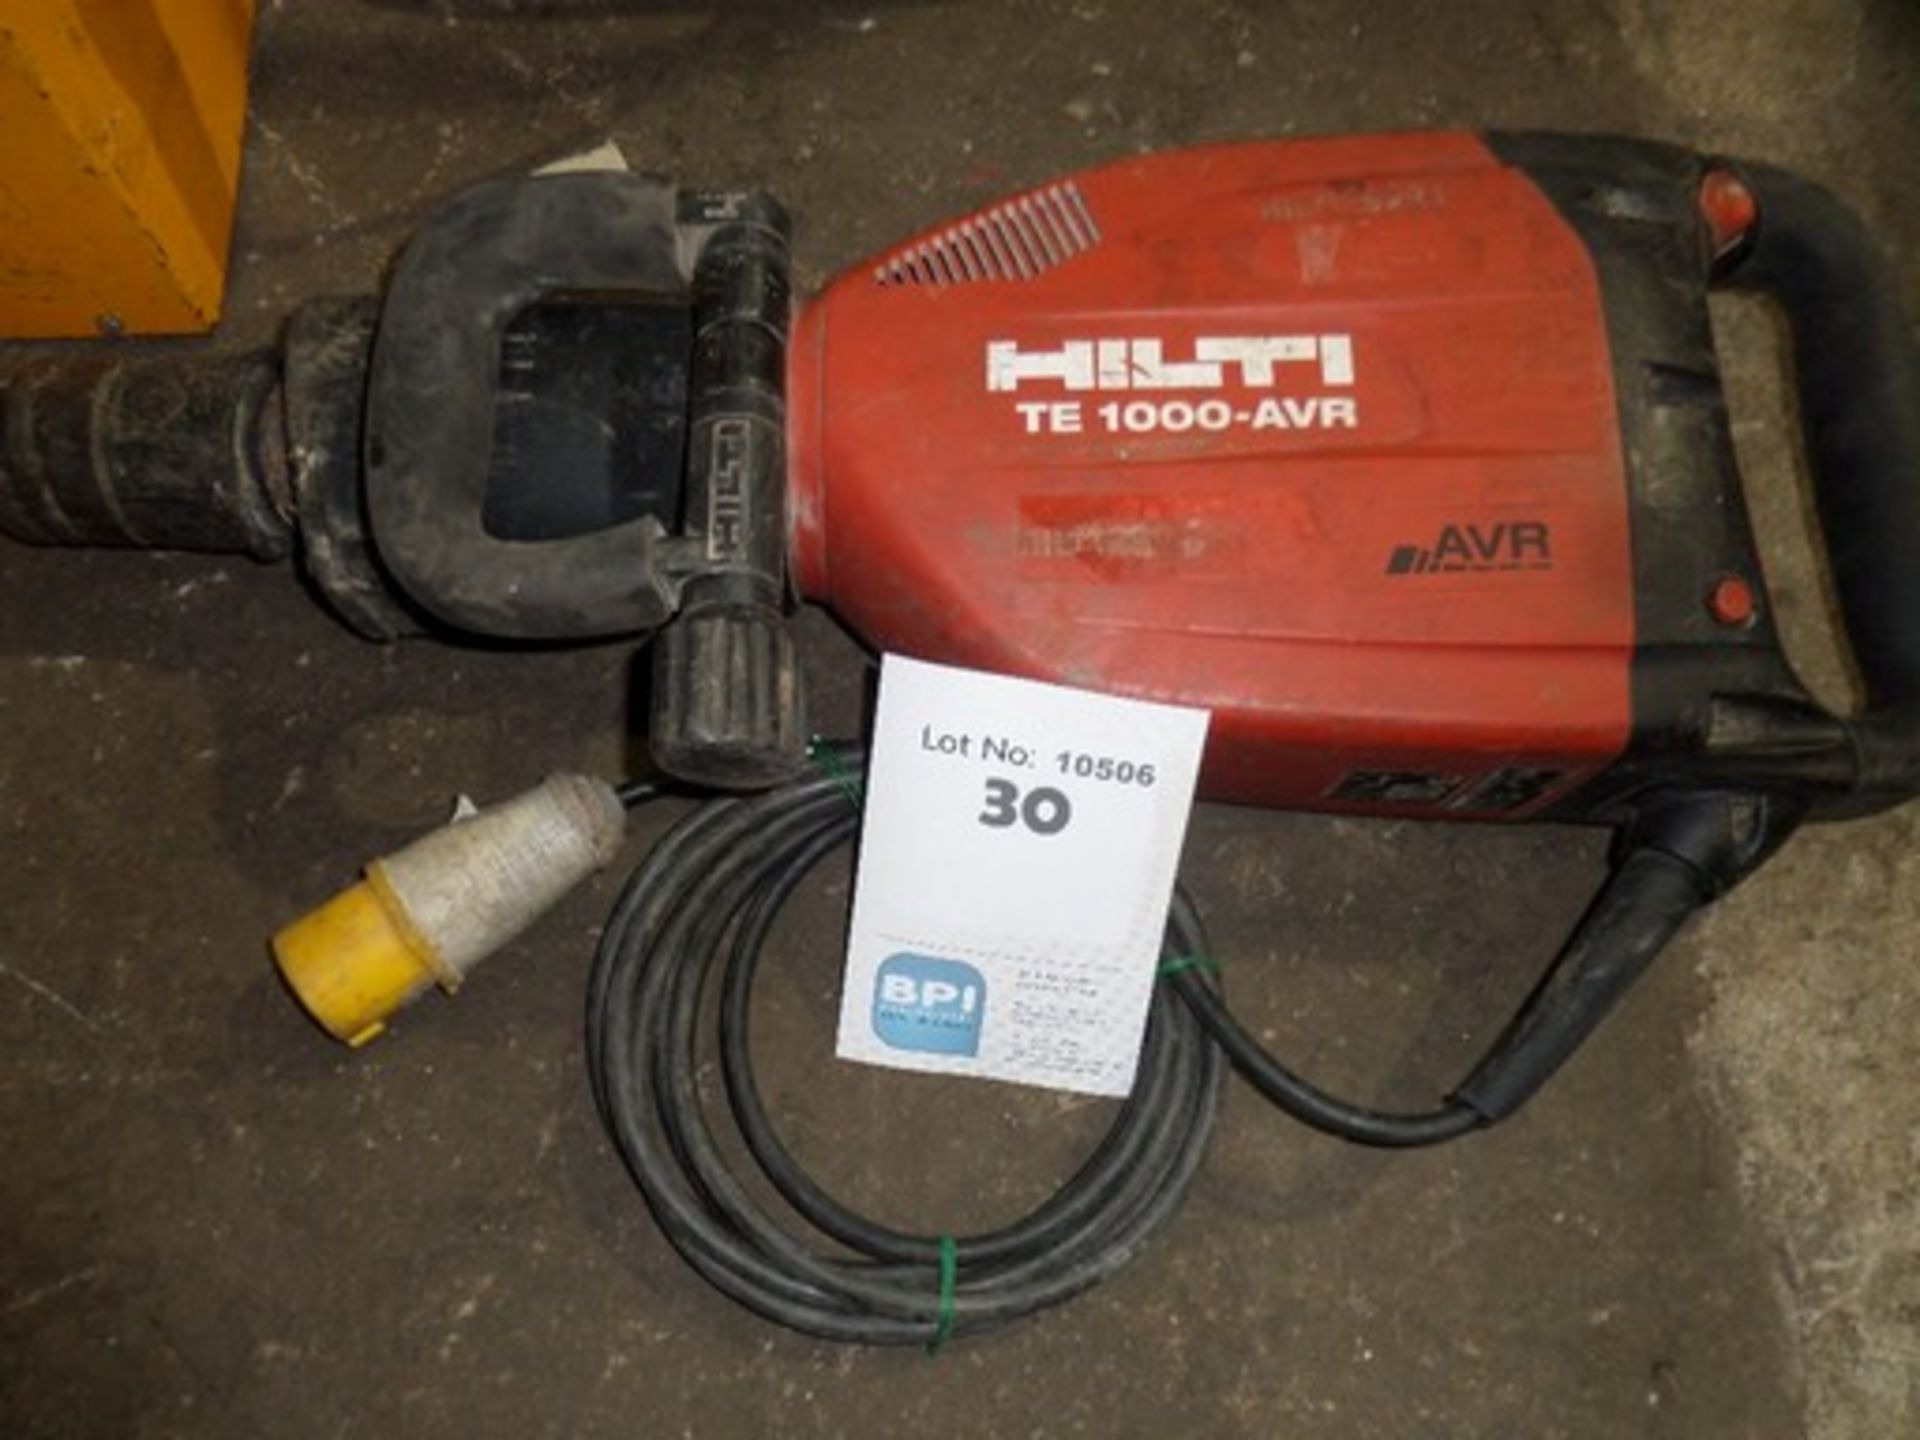 Hilti TE 1000 AVR {015173} BREAKER-  VIBRATION-DAMPED-  110V 110v 16amp connection and appears to be